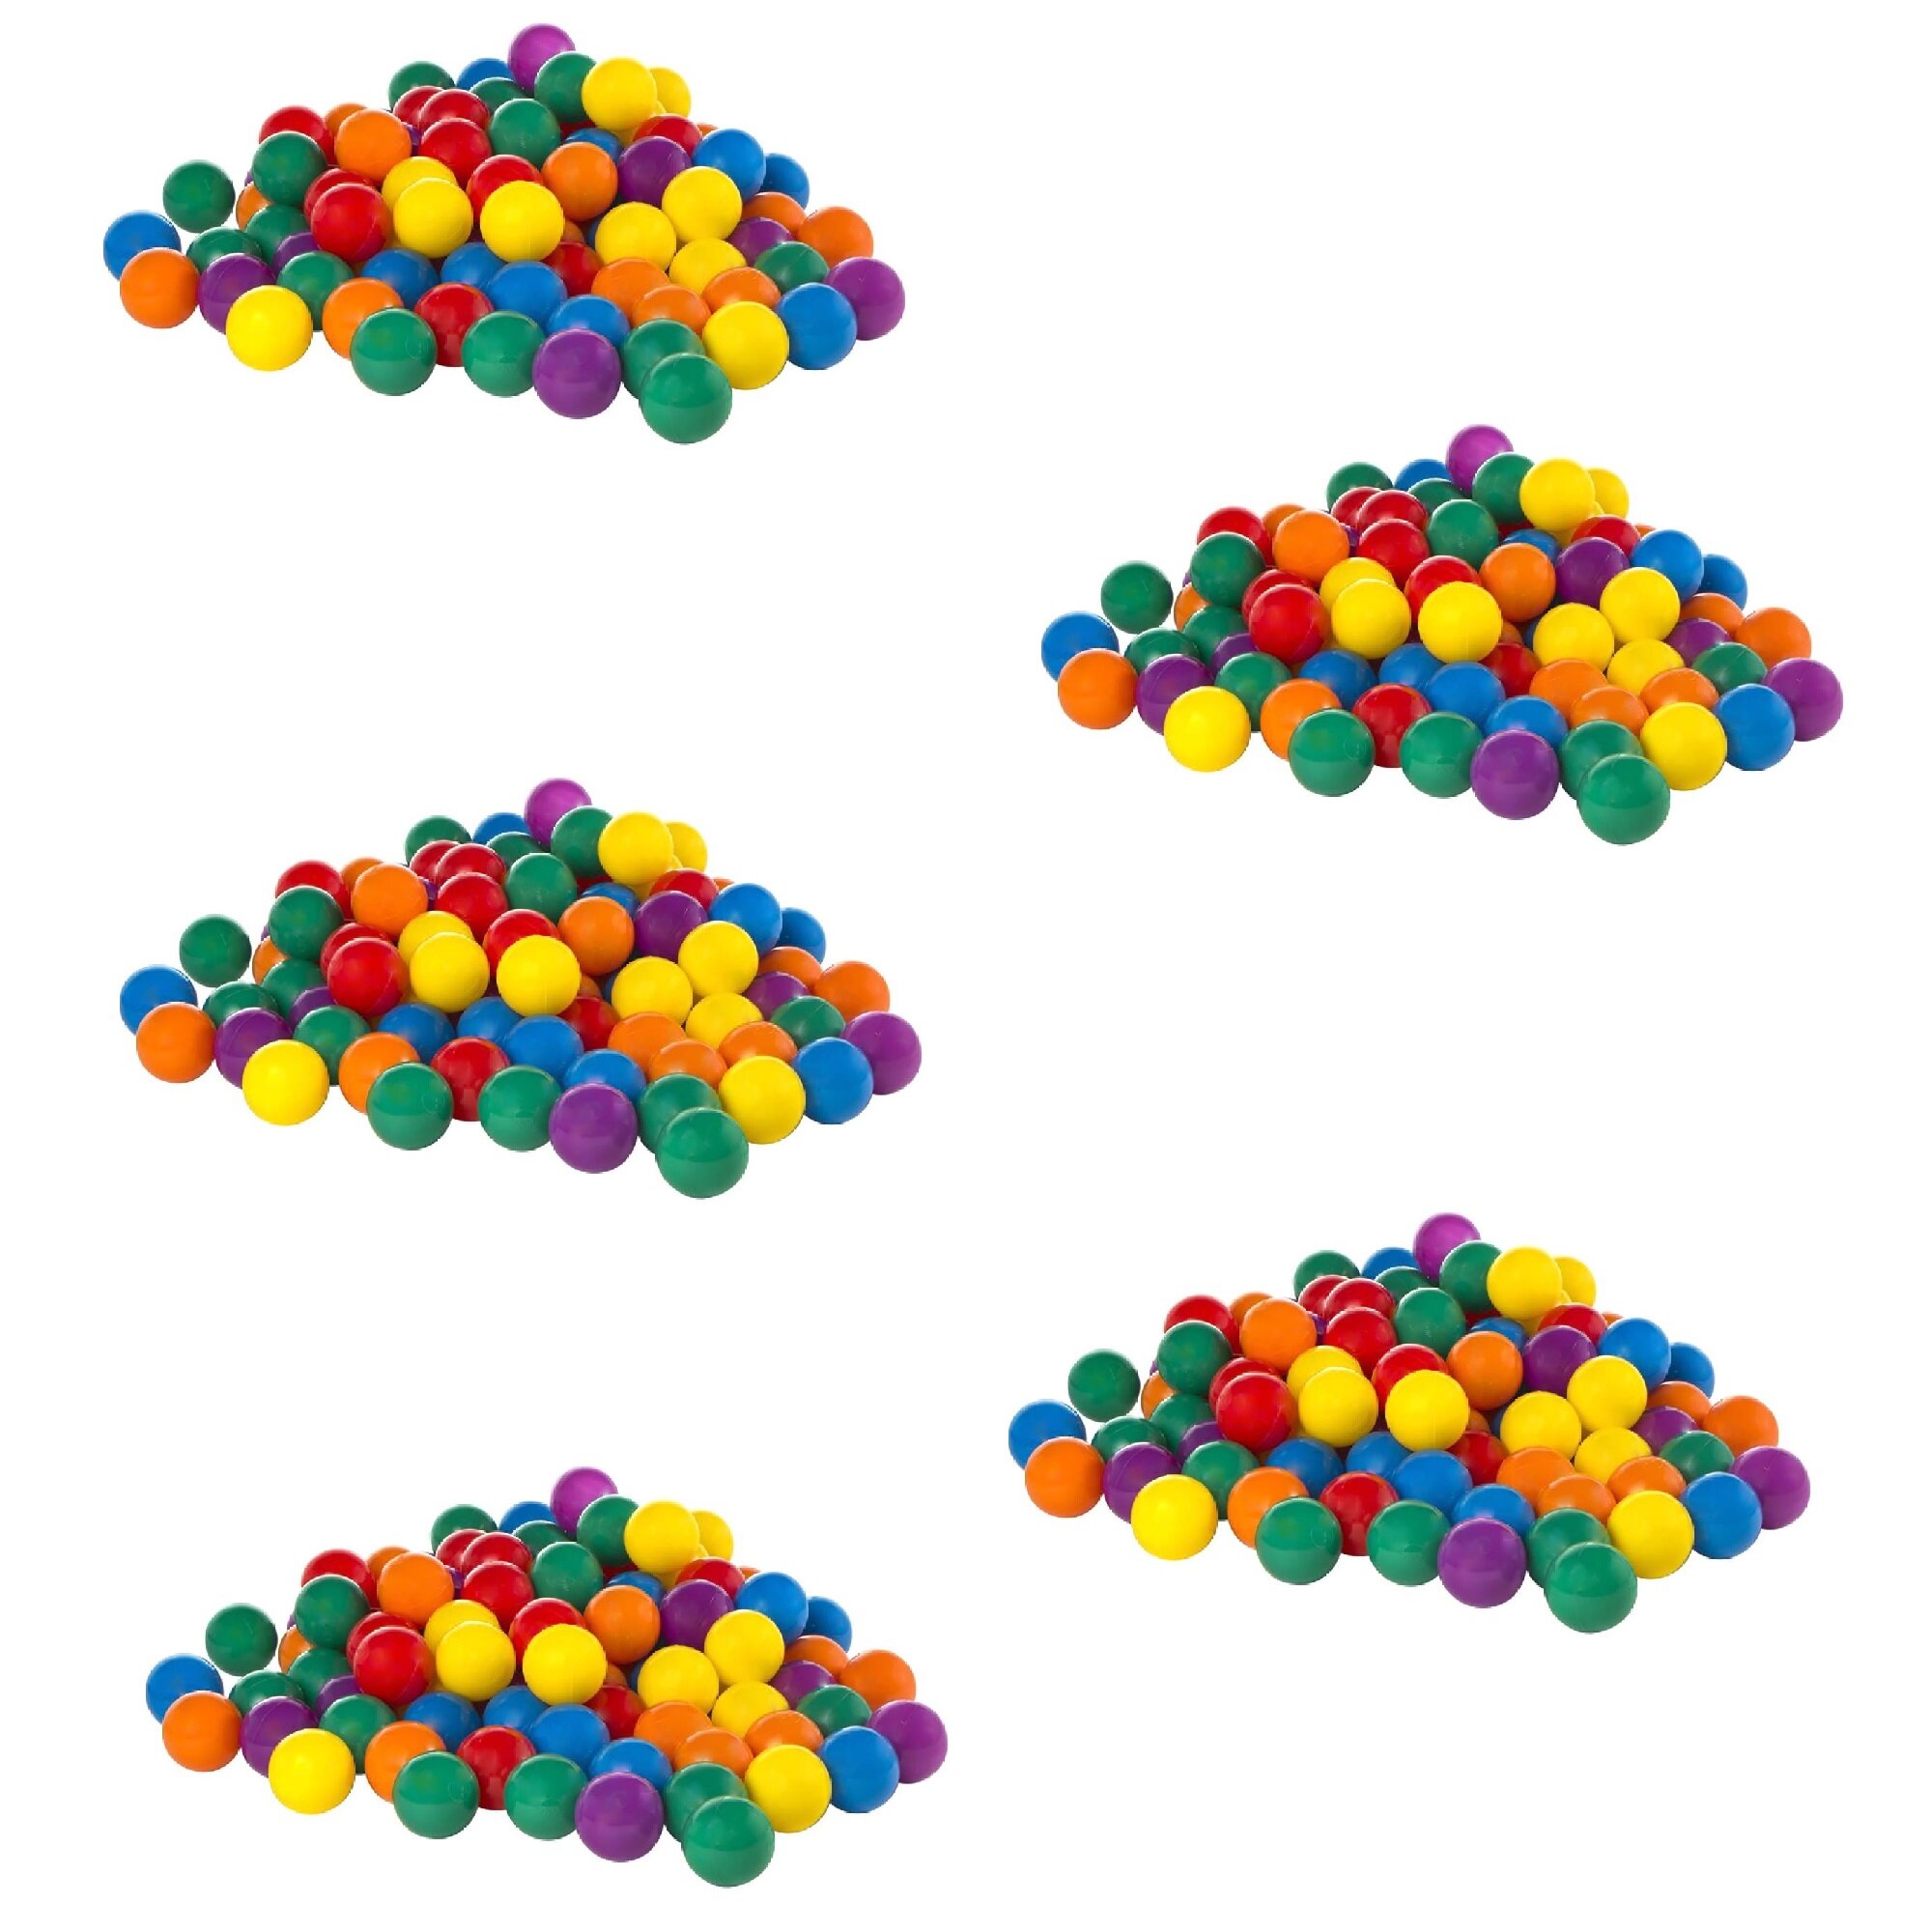 Details about    Intex 100-Pack Large Plastic Multi-Colored Fun Ballz For Ball Pits 2 Pack 